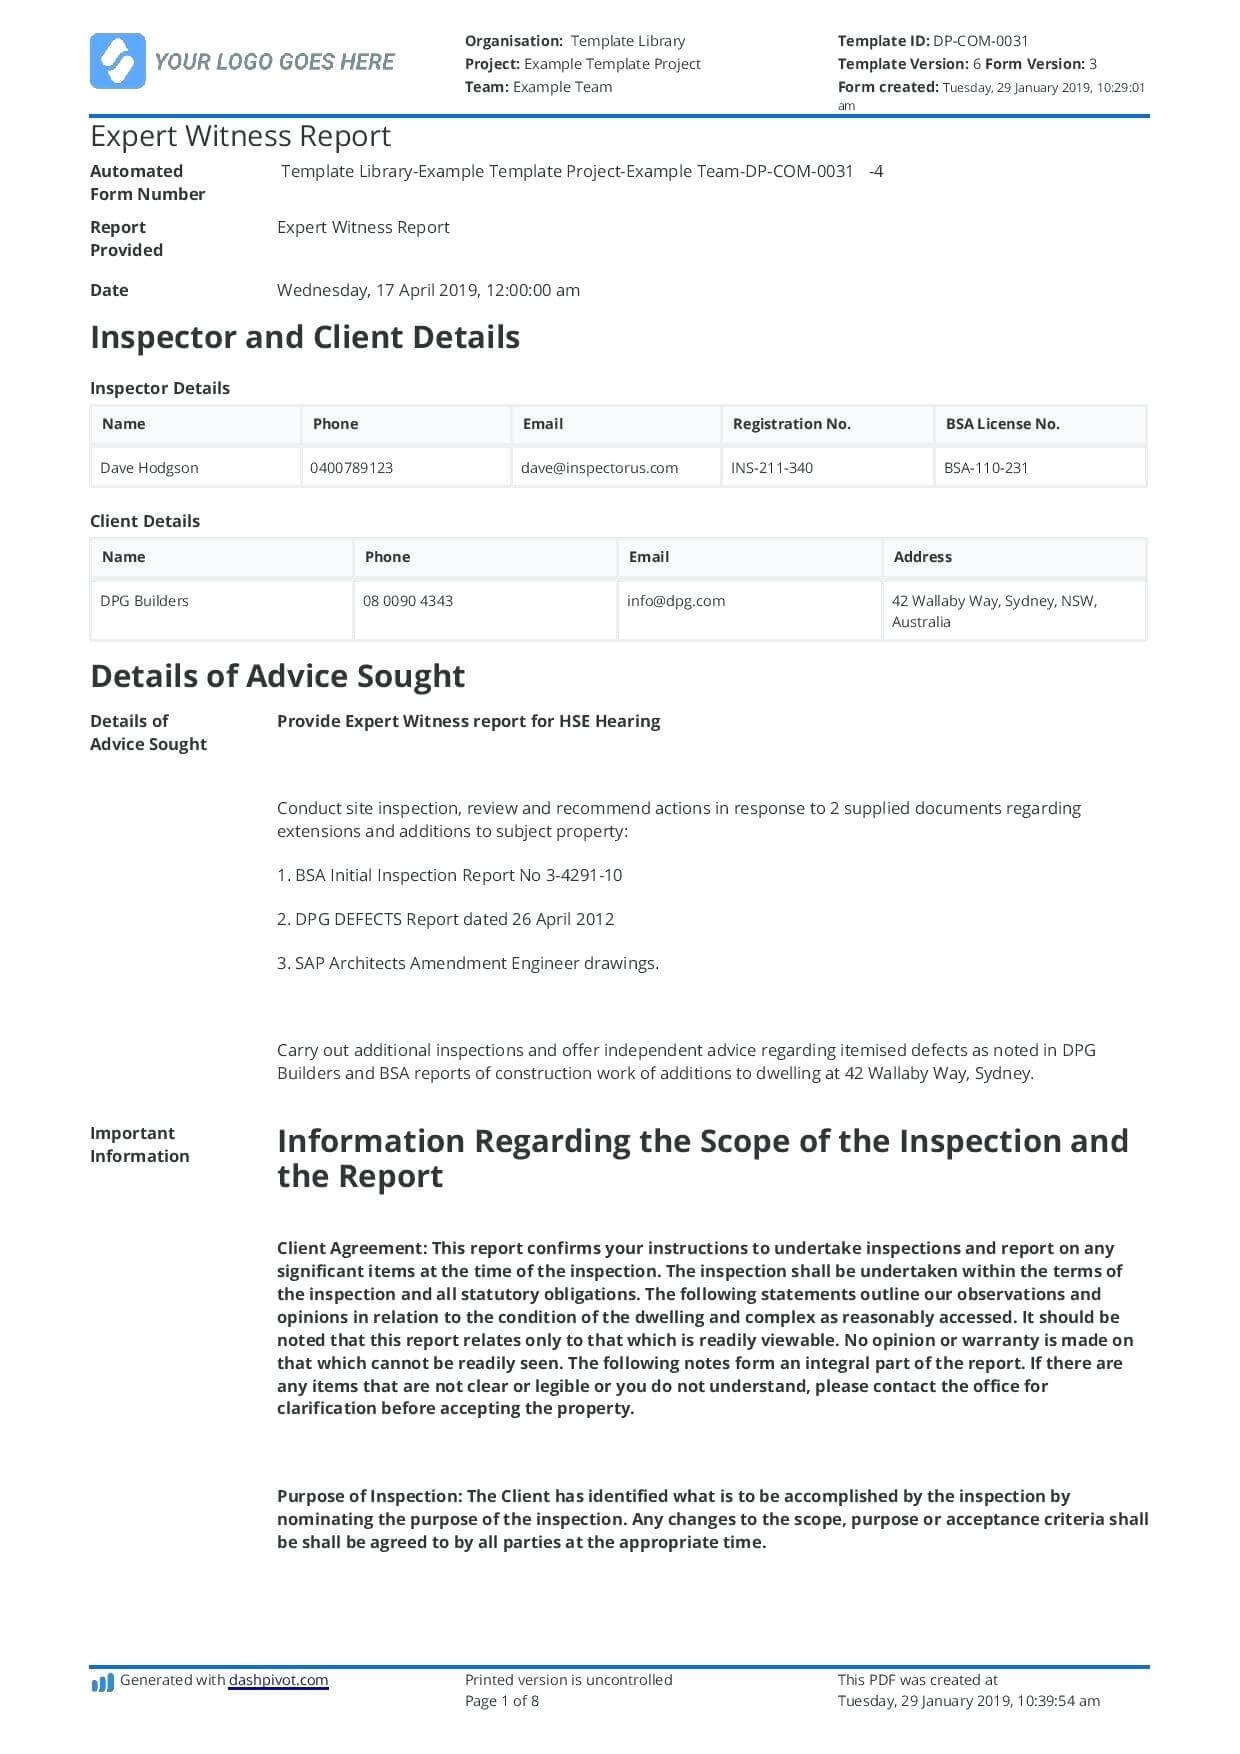 Data Breach Report Template Examples Investigation Incident With Expert Witness Report Template